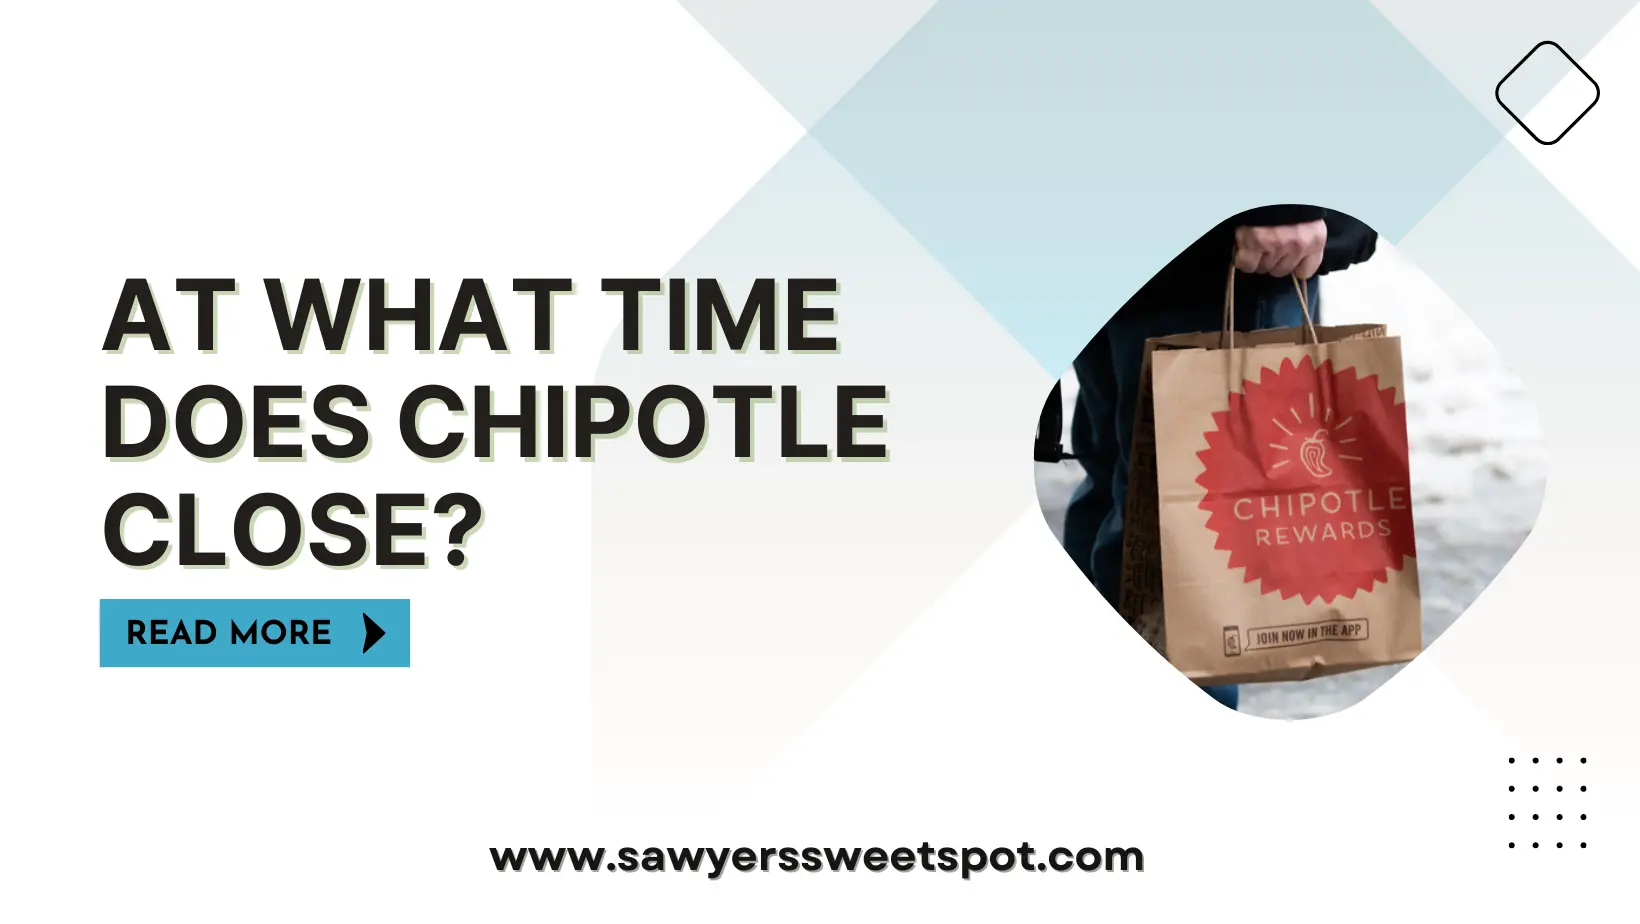 At What Time Does Chipotle Close?